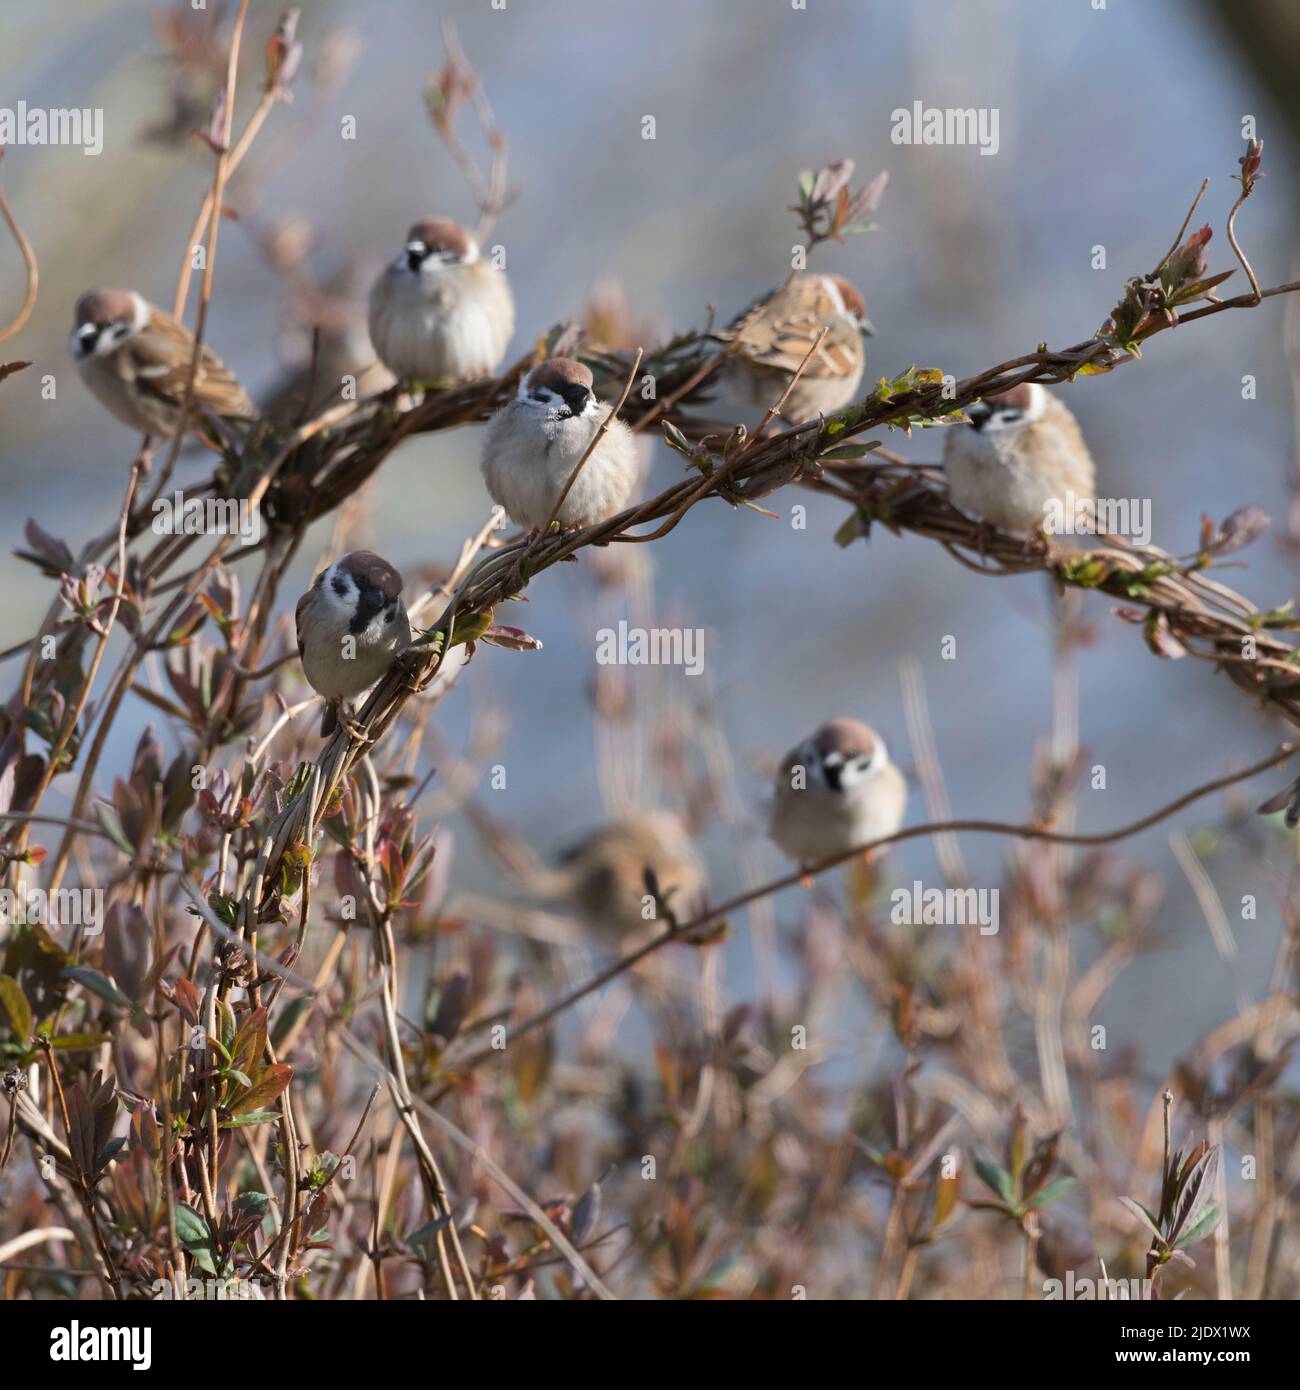 A Small Flock (or Host) of Tree Sparrows (Passer Montanus) Congregating on Intertwined Stems of Common Honeysuckle (Lonicera Periclymenum) in Spring Stock Photo